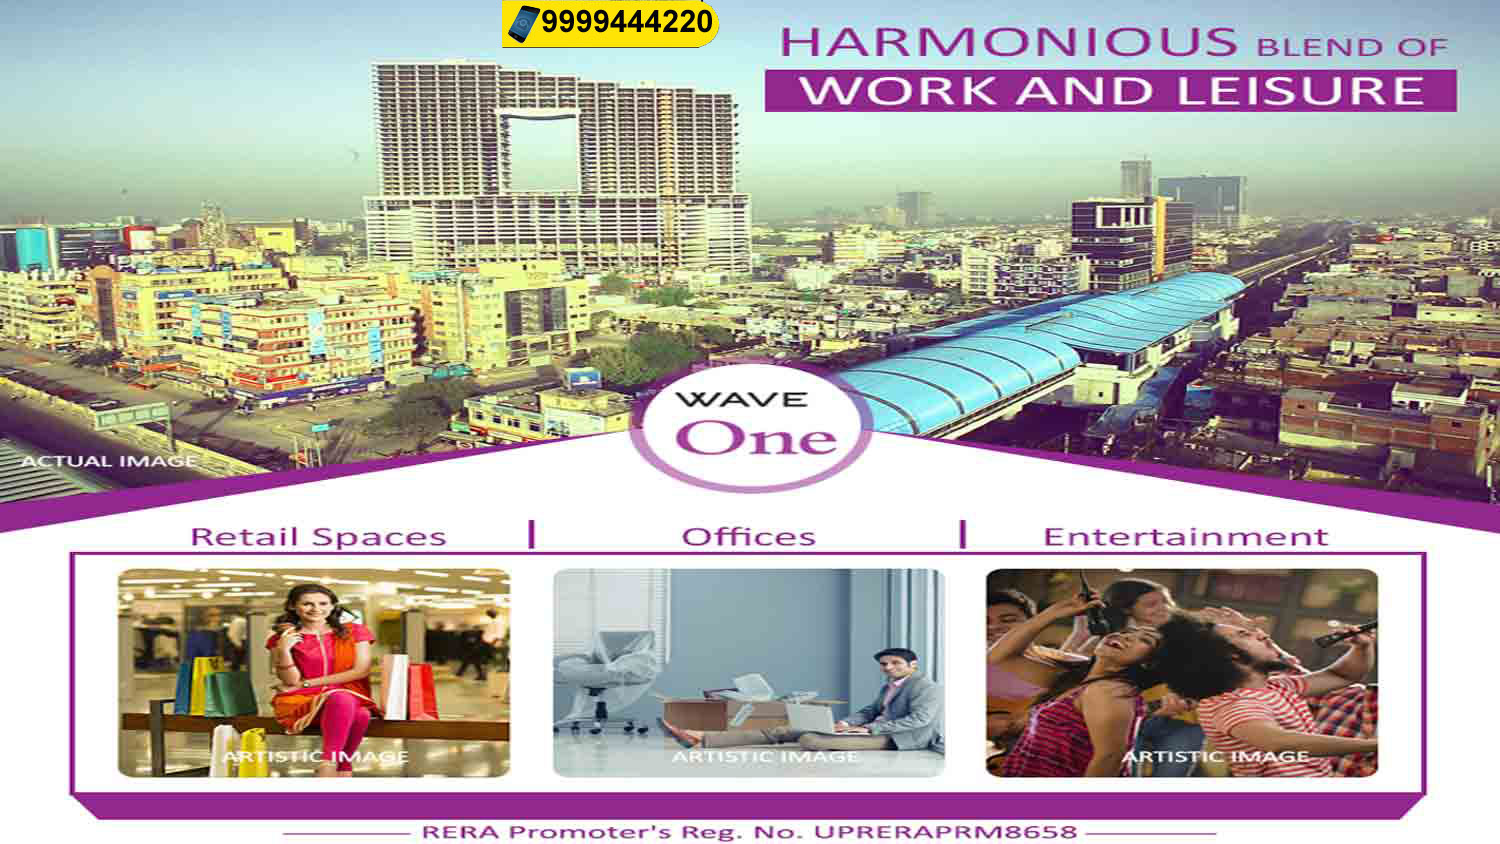 Wave One Noida- A Top Commercial Project in Noida to Buy Office Spaces